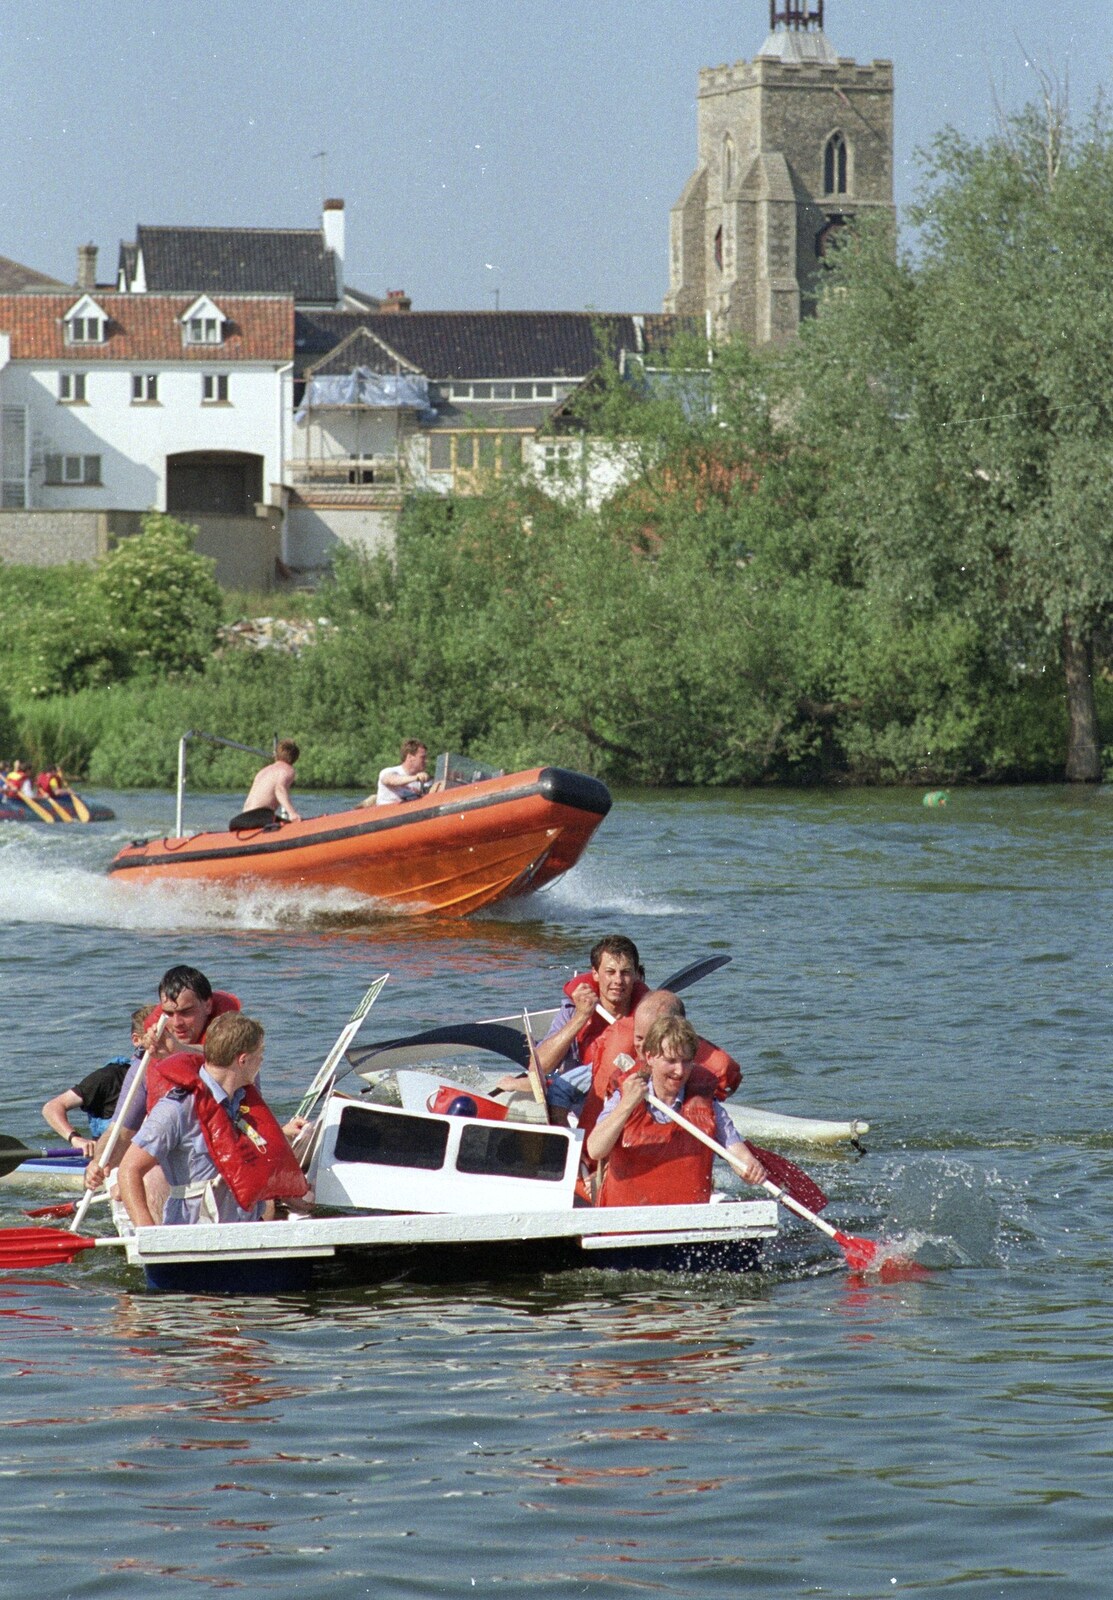 A RIB powers around rescuing stragglers from The Diss Raft Race, Diss Mere, Norfolk - 6th July 1991